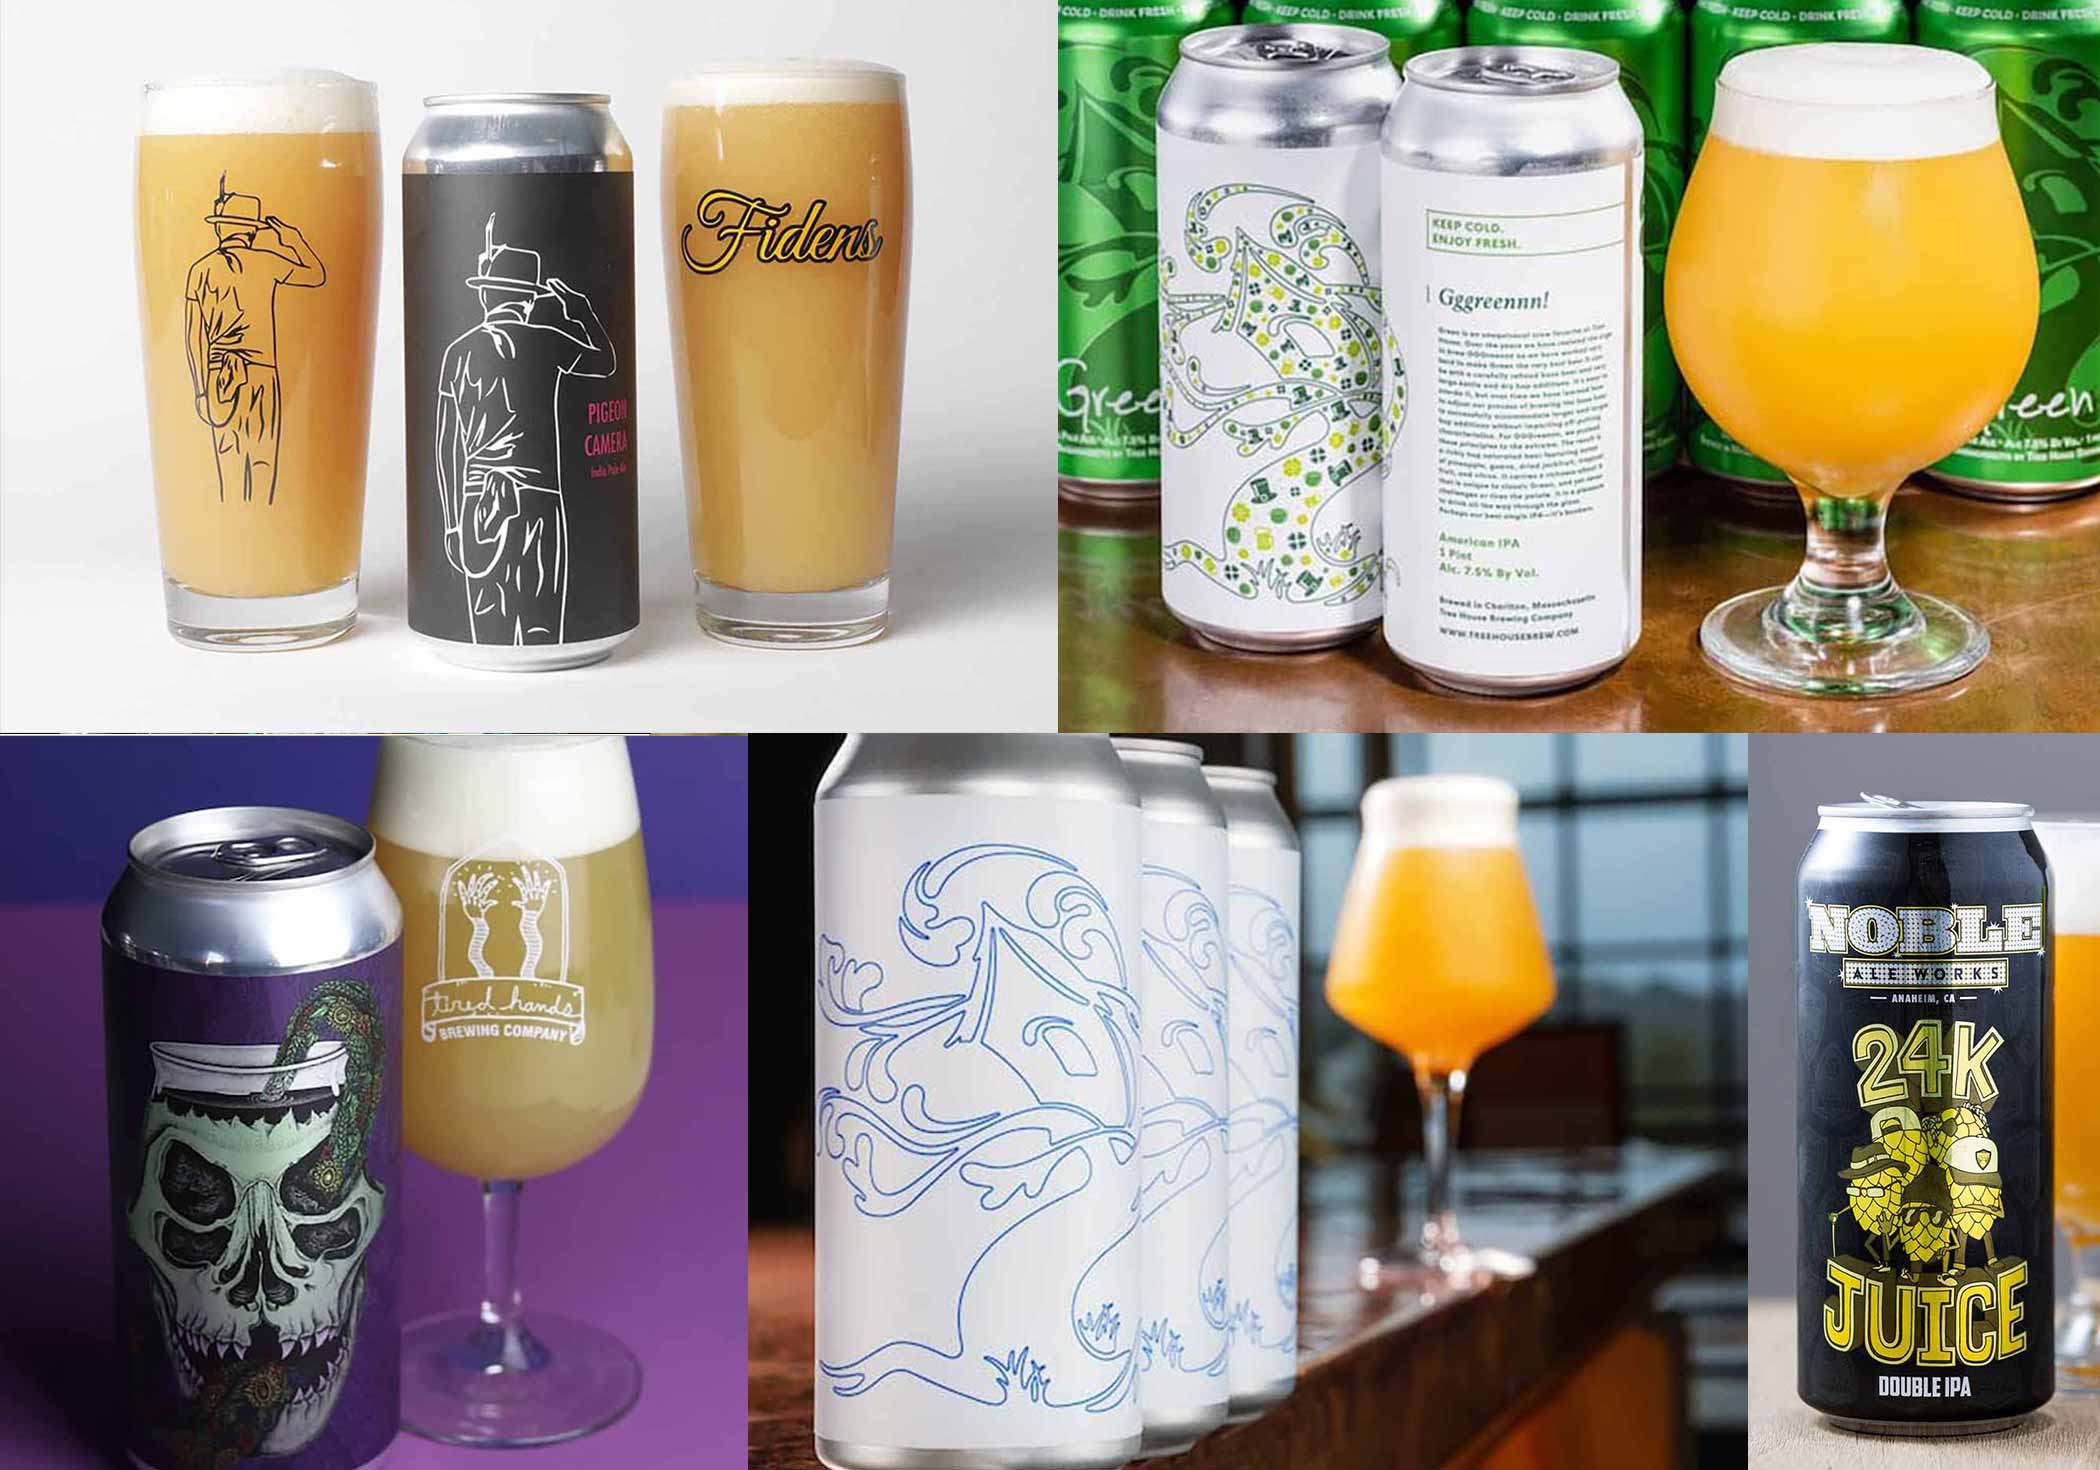 Untappd’s All-Time Top-Rated New England/Hazy IPAs